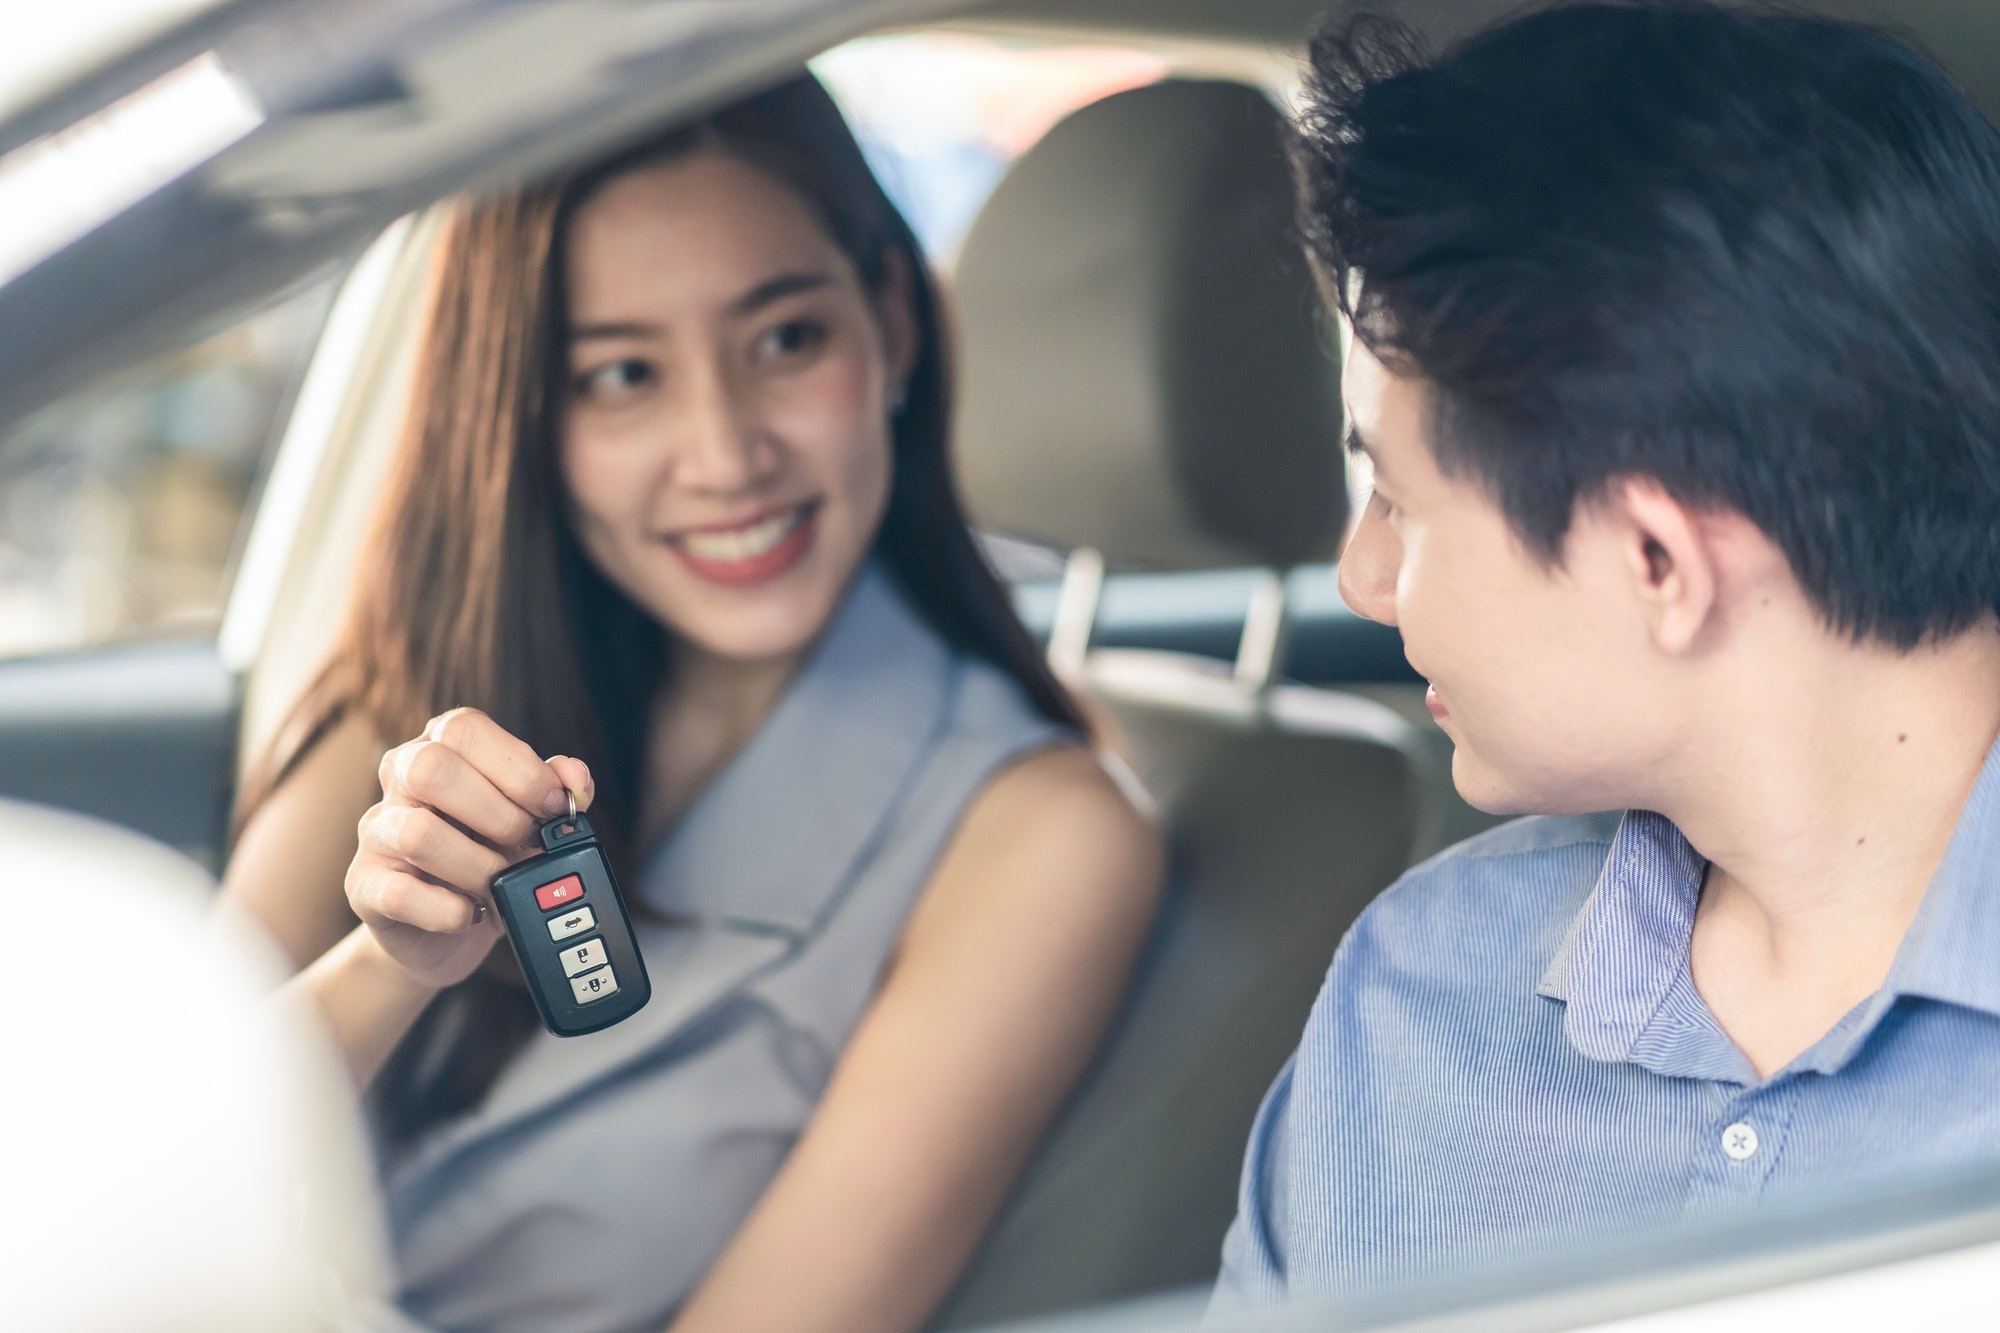 Asian woman showing car remote key to man friend sitting in vehicle at car rental company together